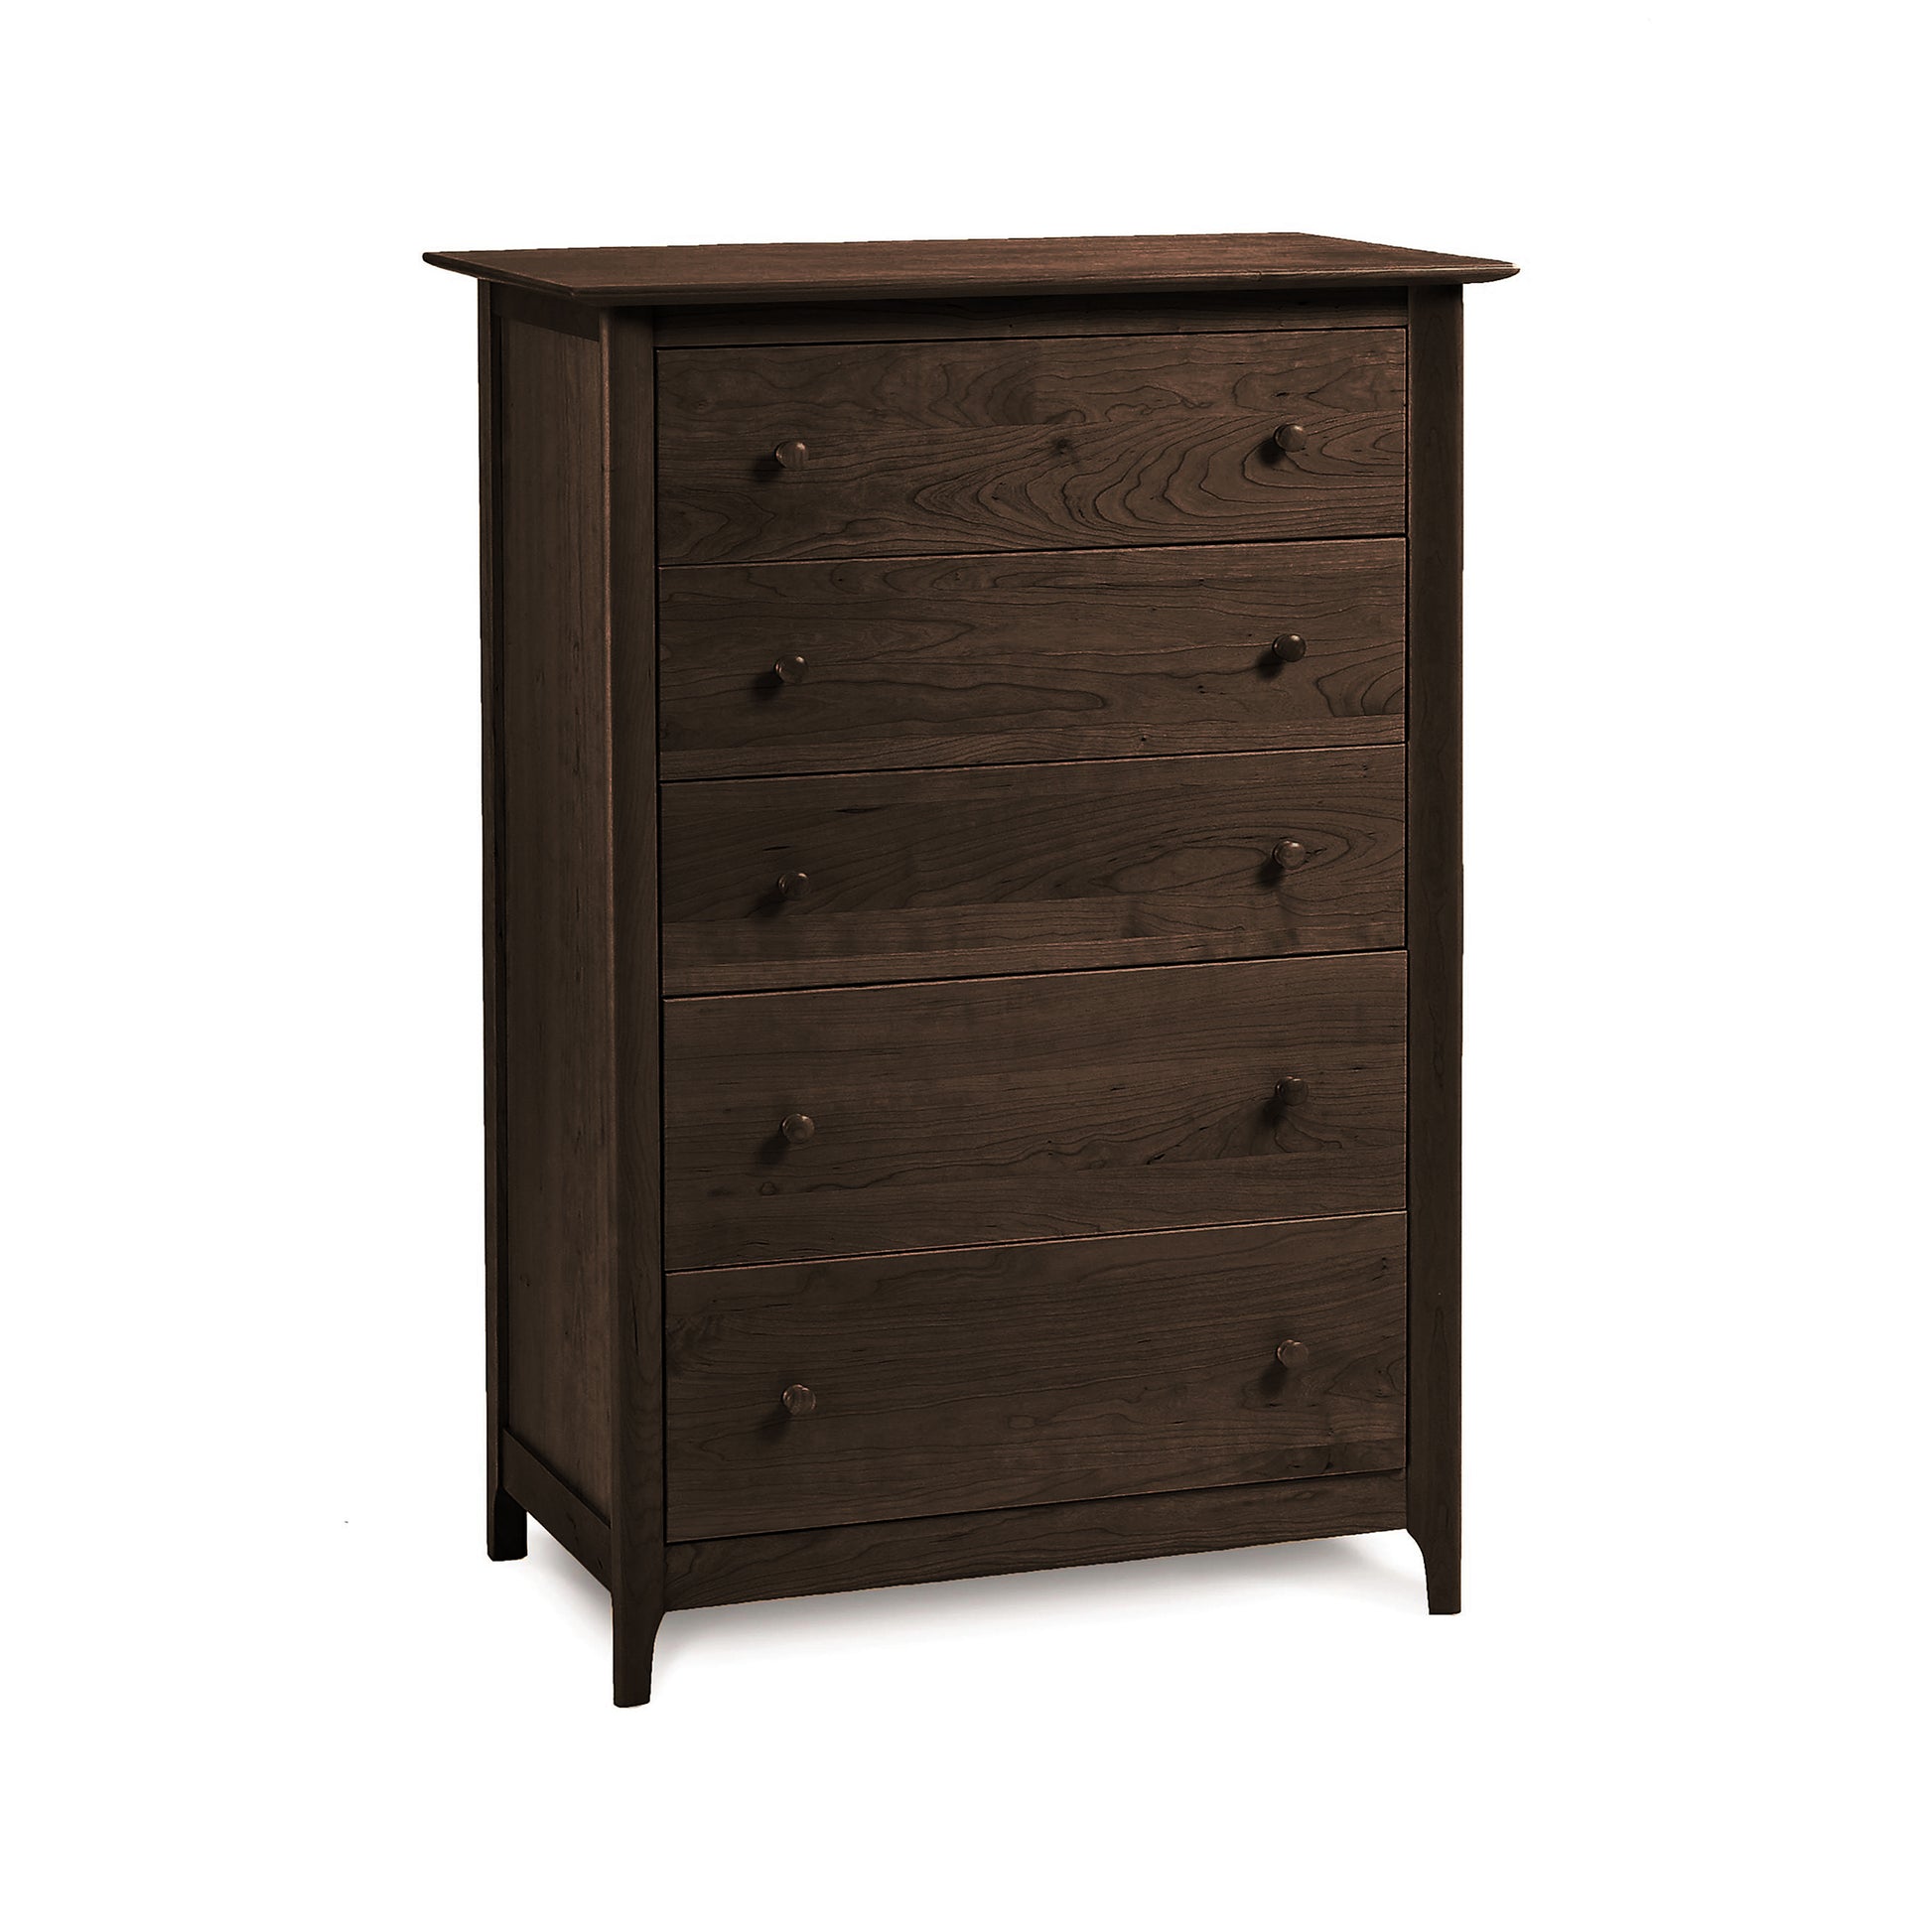 An eco-friendly Sarah 5-Drawer Chest in cherry wood with a dark finish, isolated on a white background by Copeland Furniture.